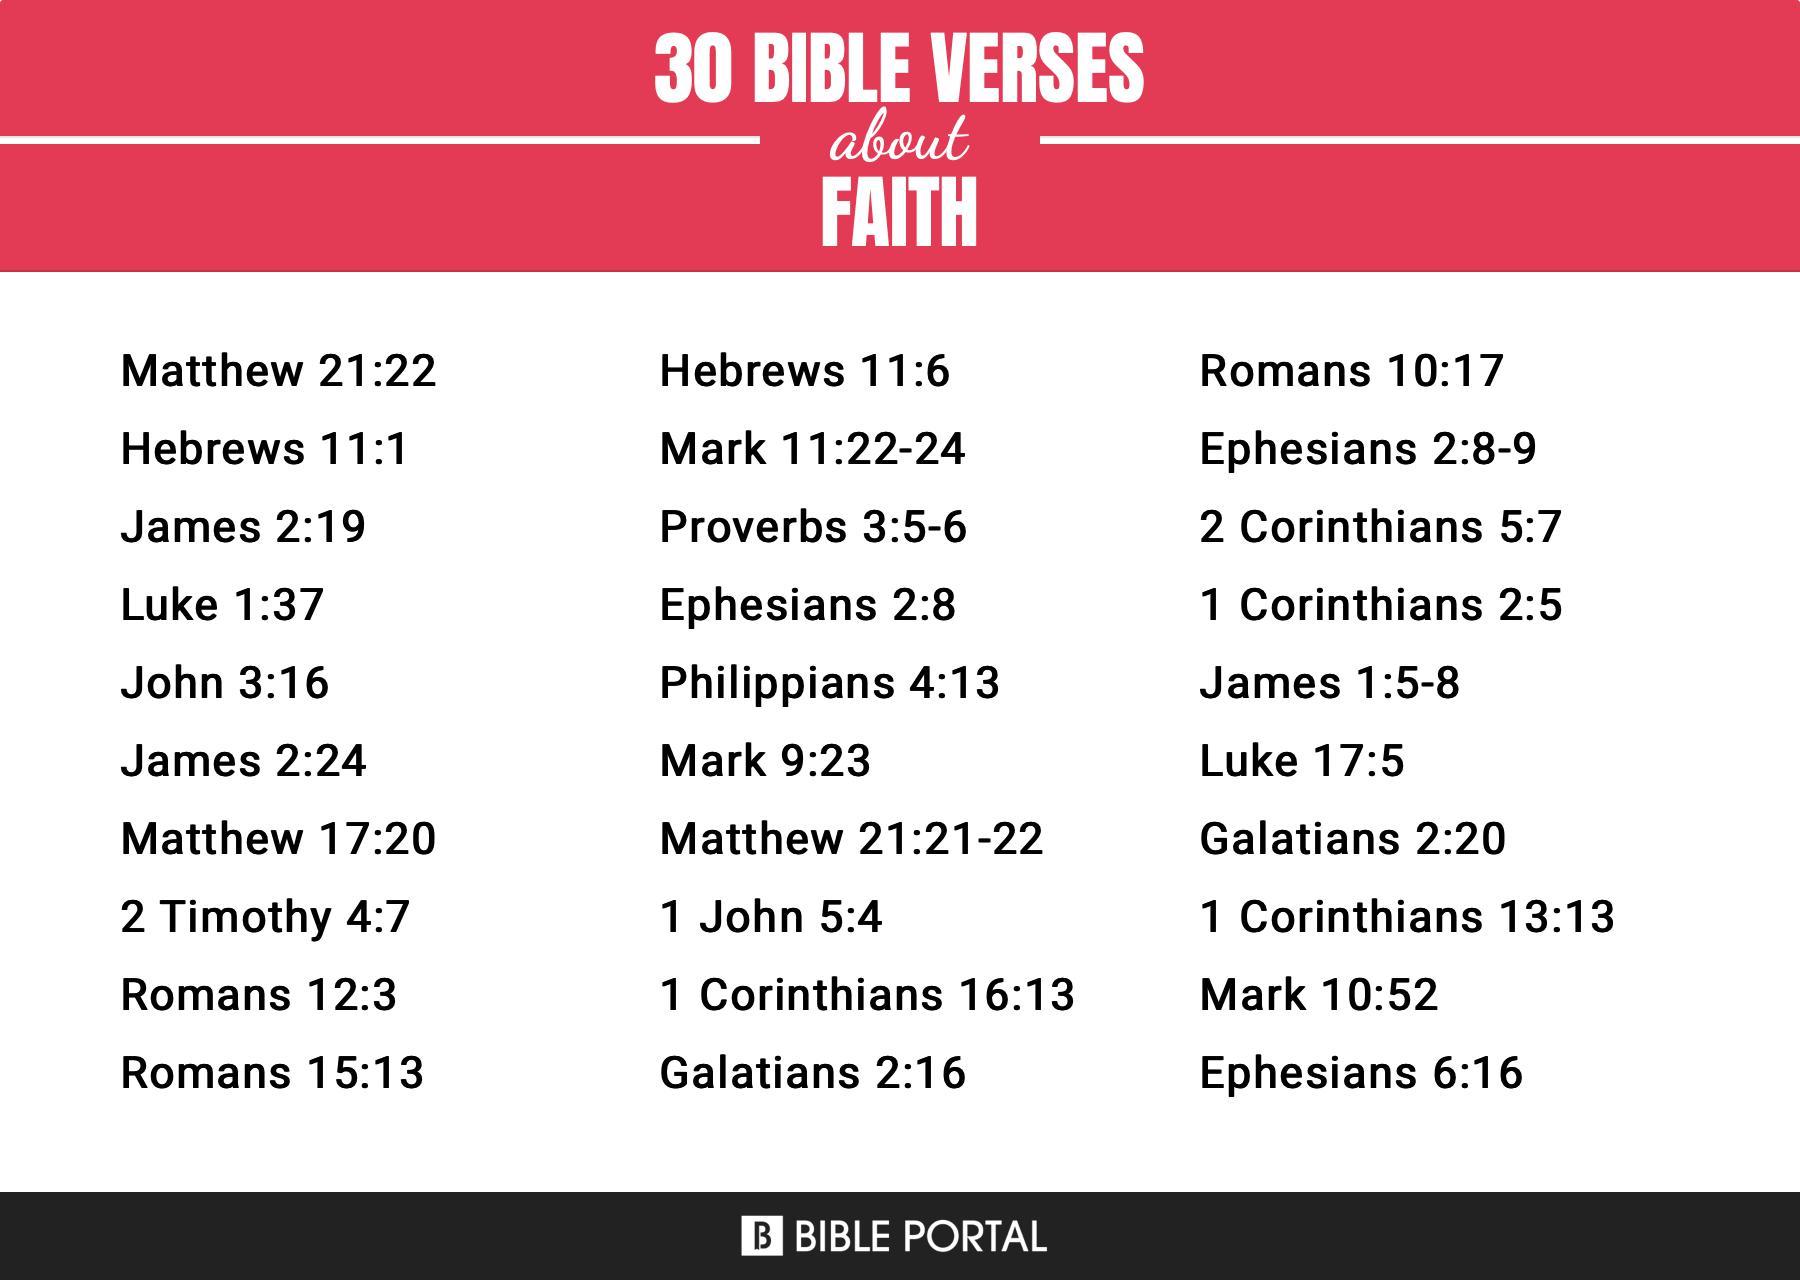 What Does the Bible Say about Faith?